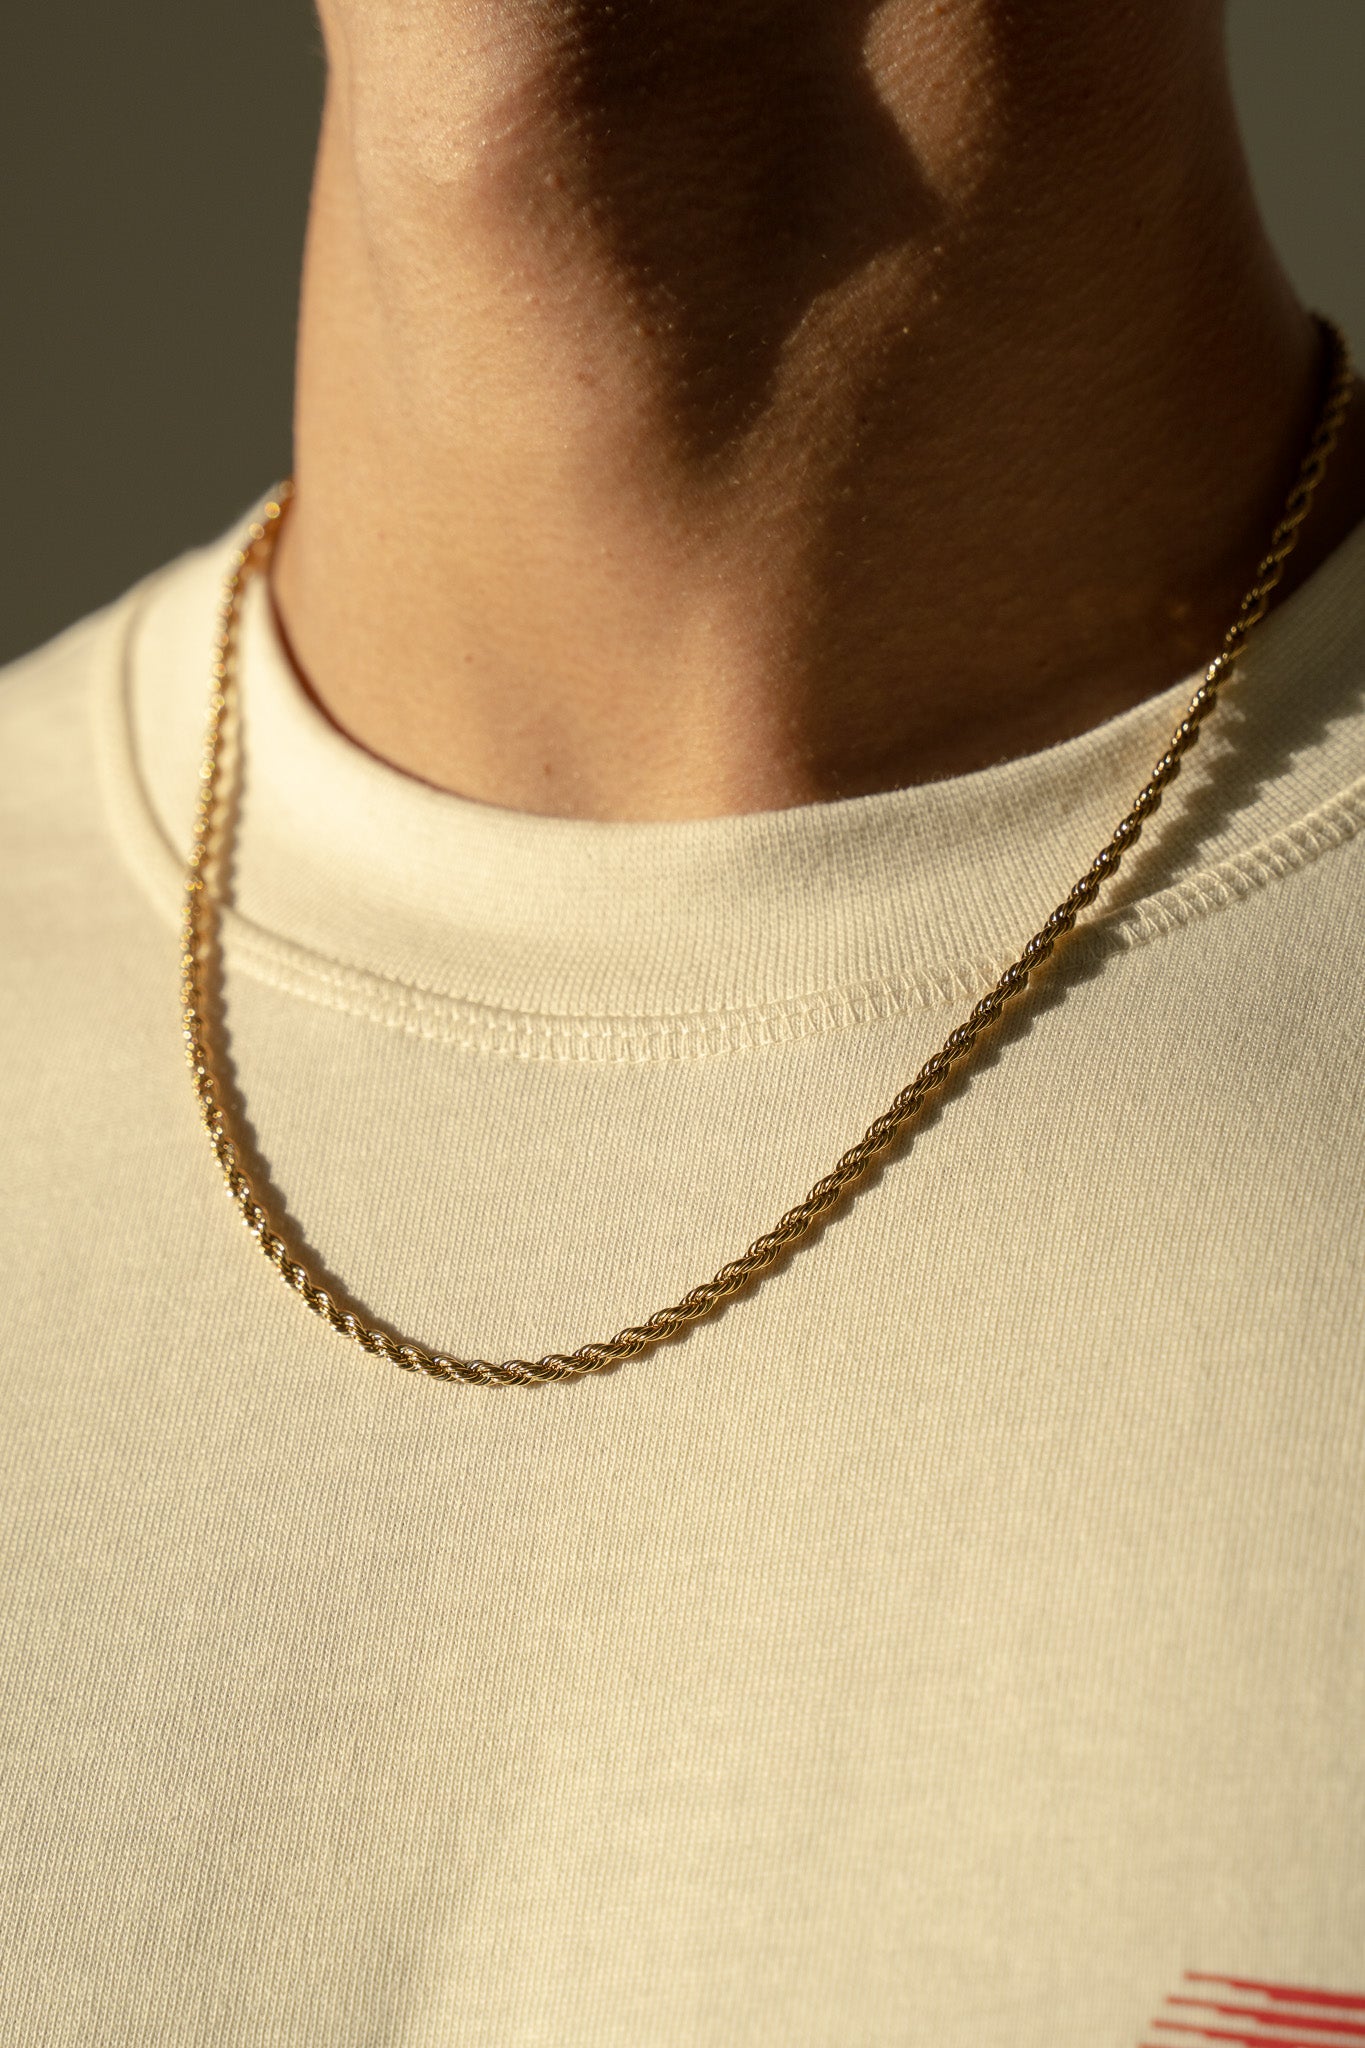 Harrington Necklace in Gold - 3mm